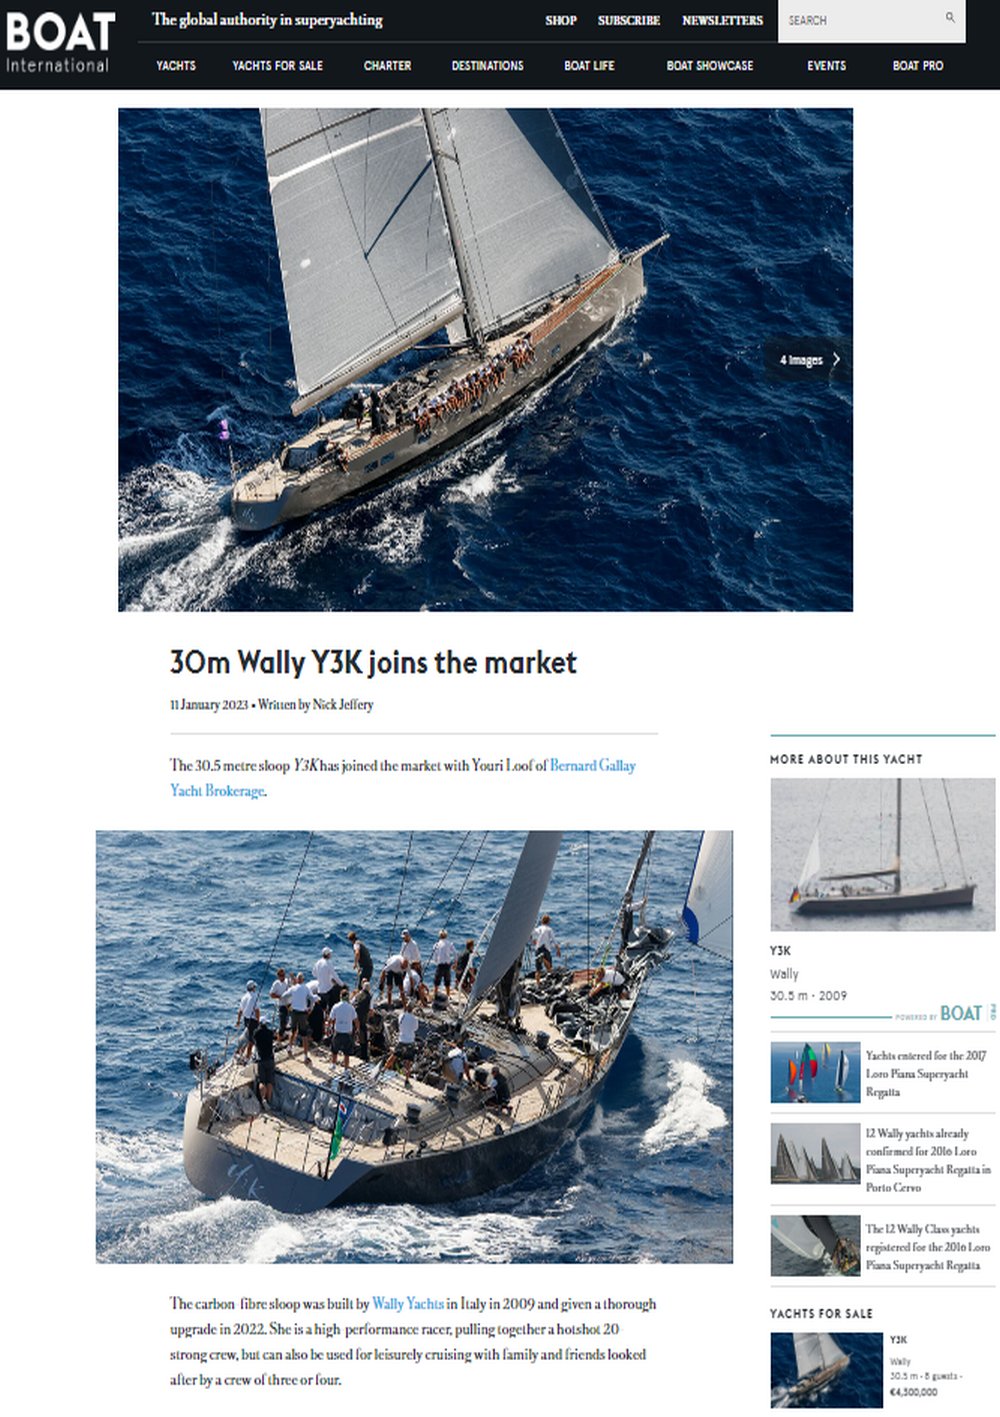 Boat International magazine presents the magnificient 100ft Wally Y3K